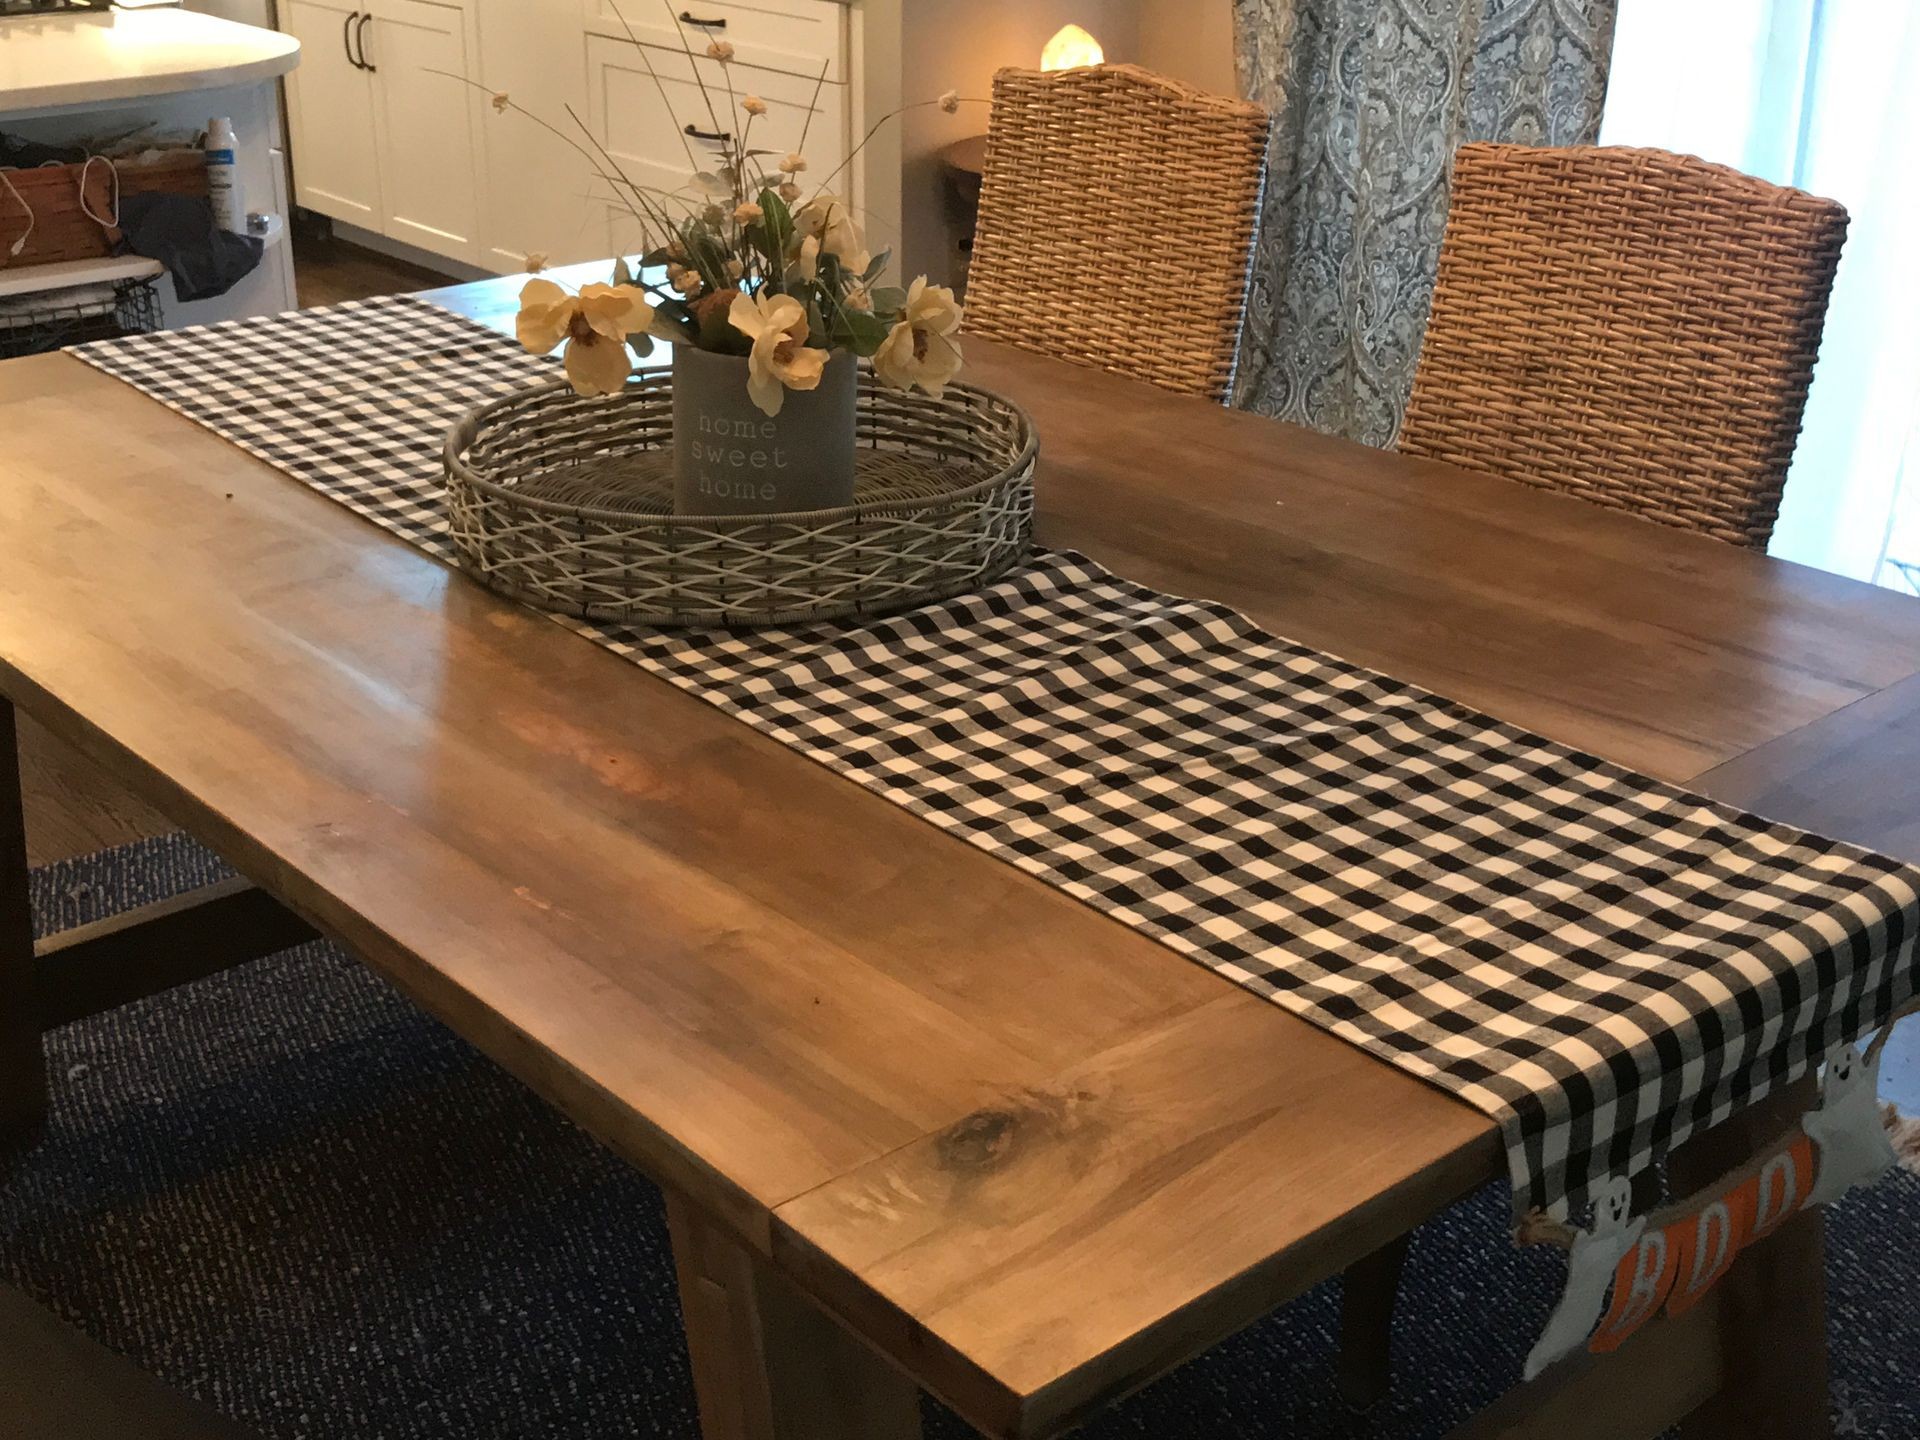 Farm table, family dinner table, dining room table, gathering table, wood table, maple table, oak table, black walnut table, kitchen table 